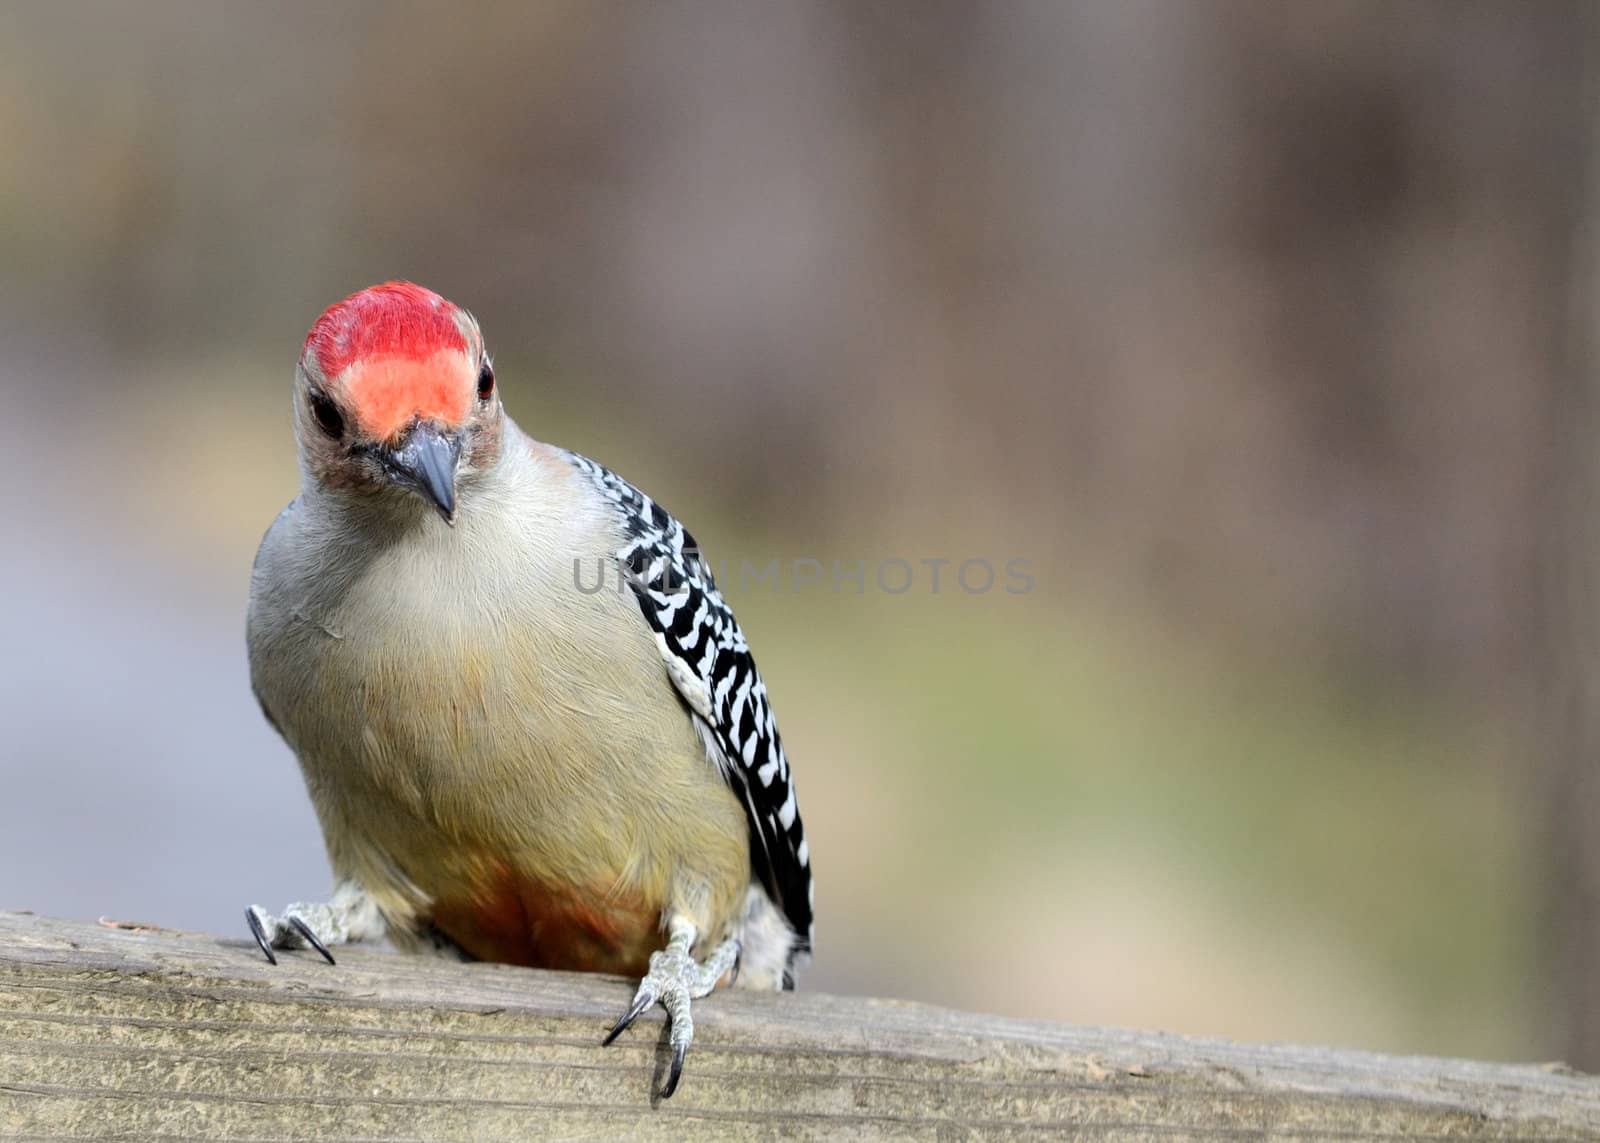 Male red-bellied woodpecker perched on a wooden post.